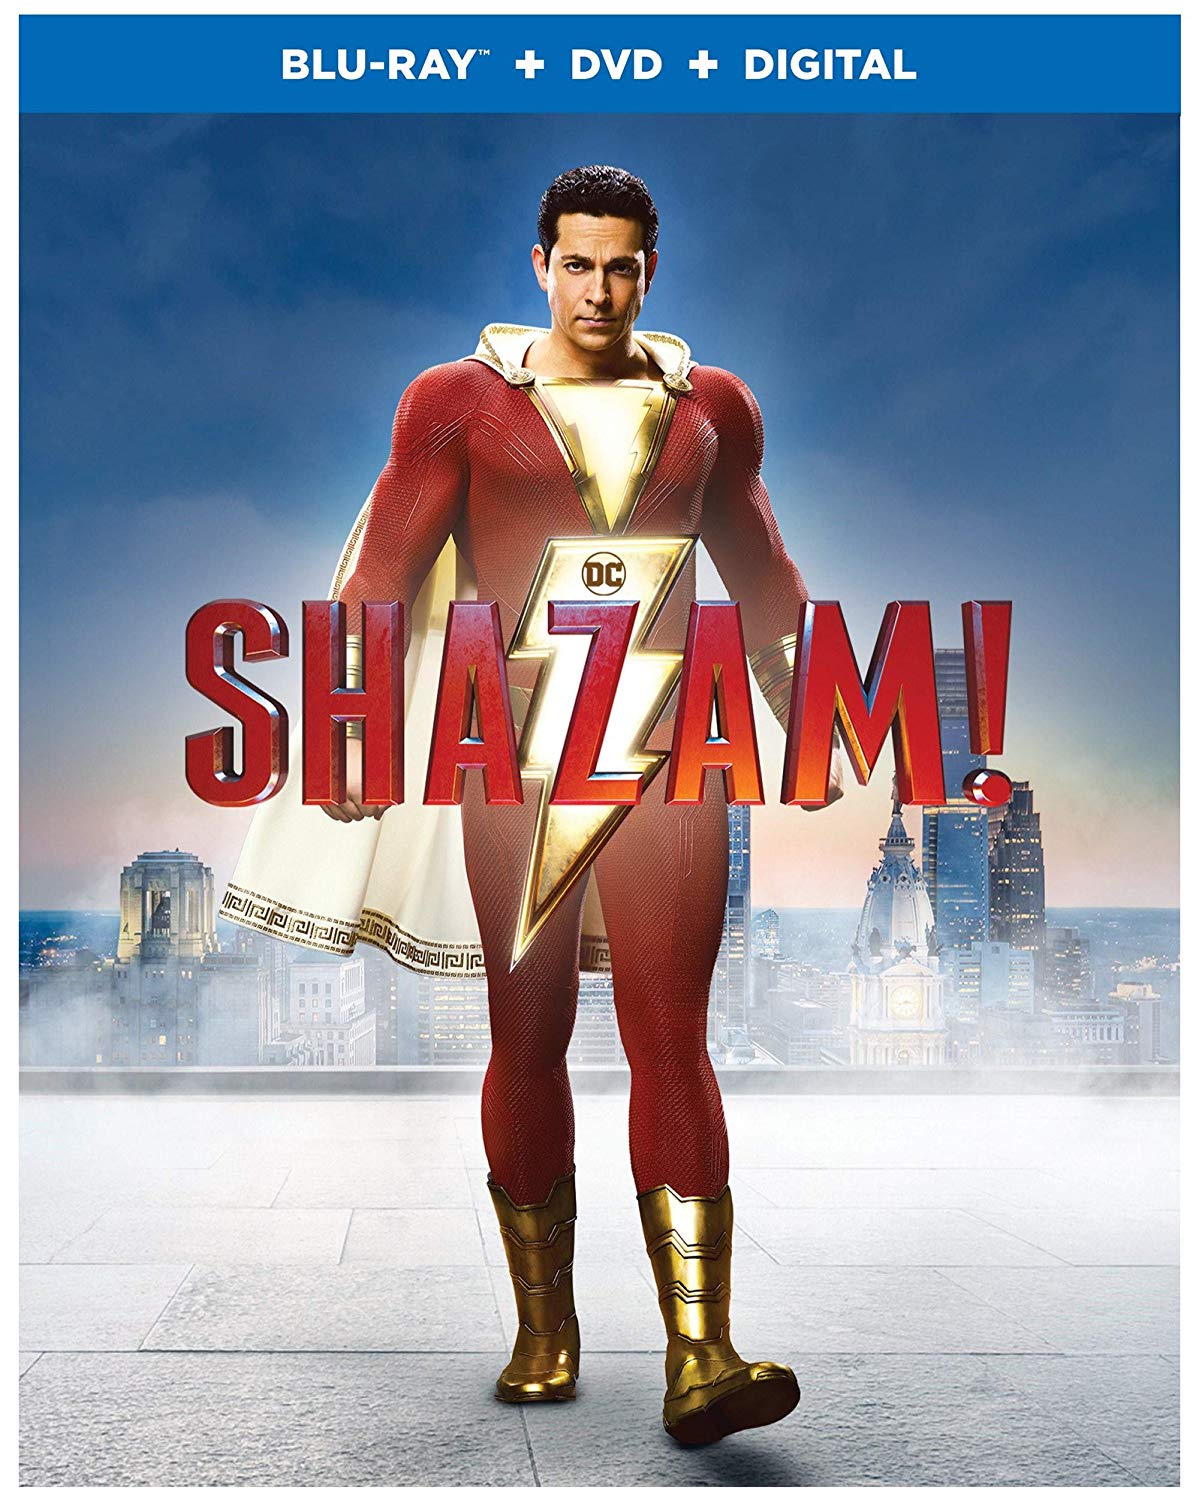 Shazam!, now available on Blu-ray and DVD